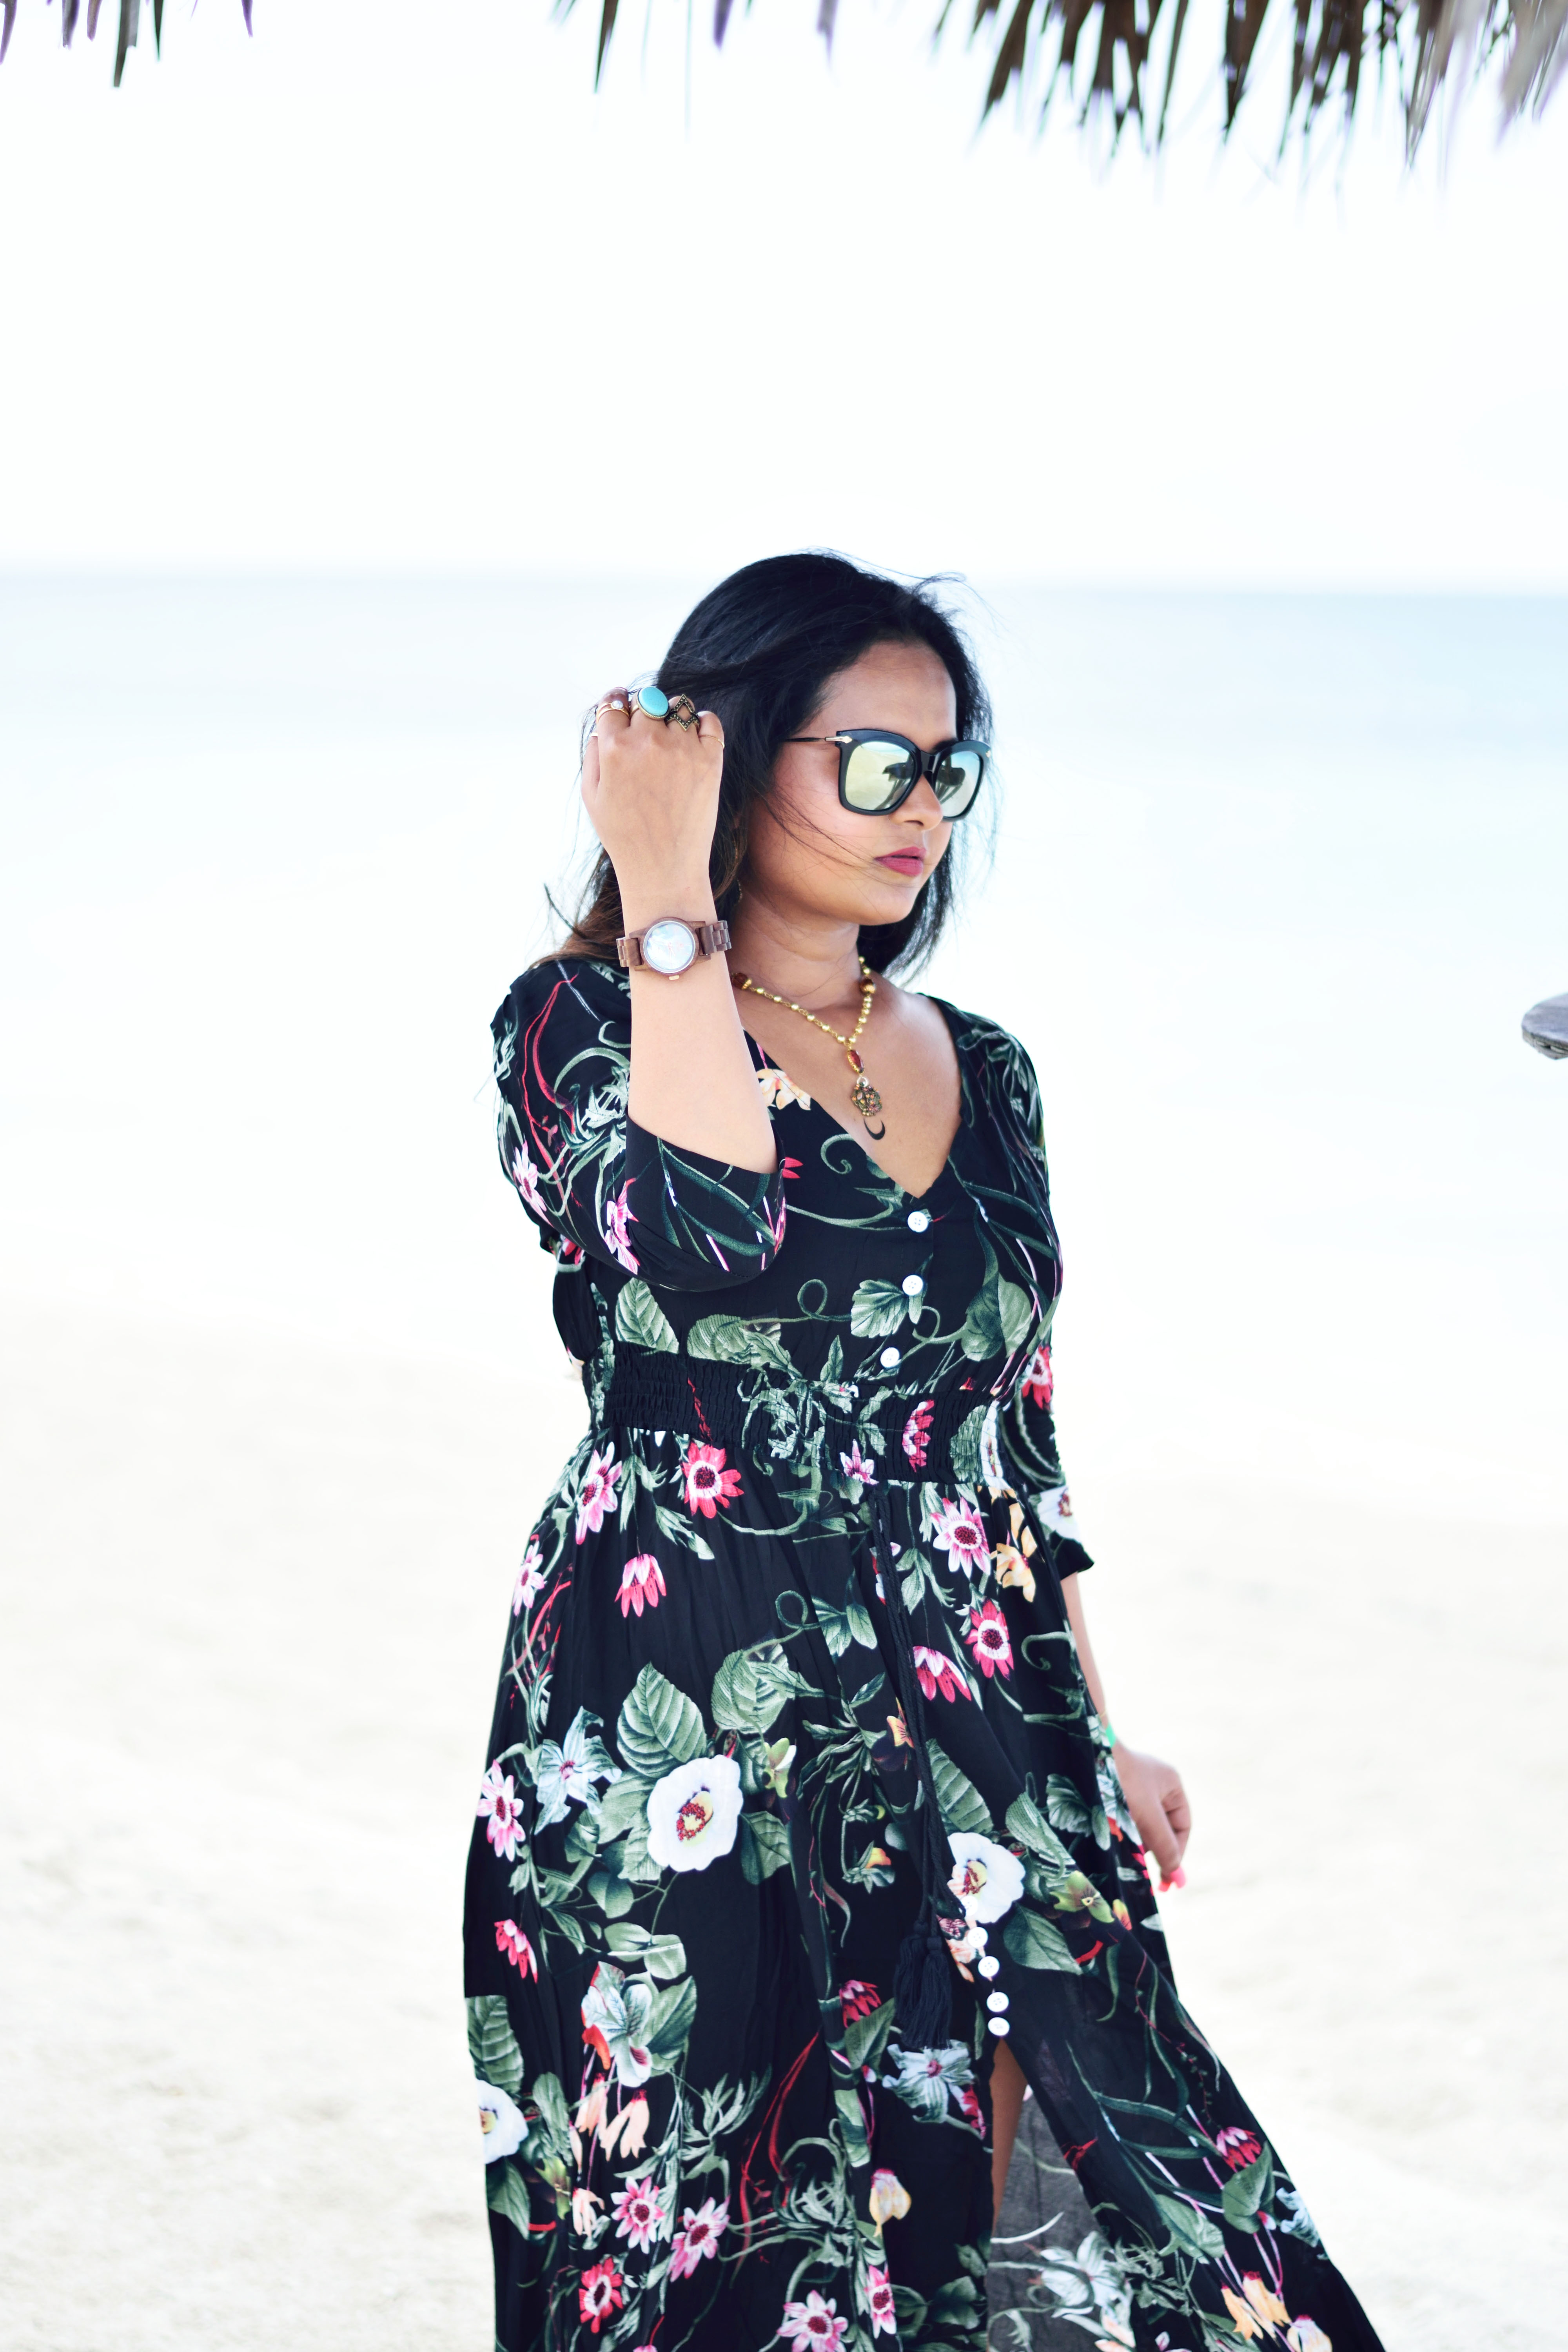 Black Floral Boho Dress from JustFashionNow - The Perfect Boho Look